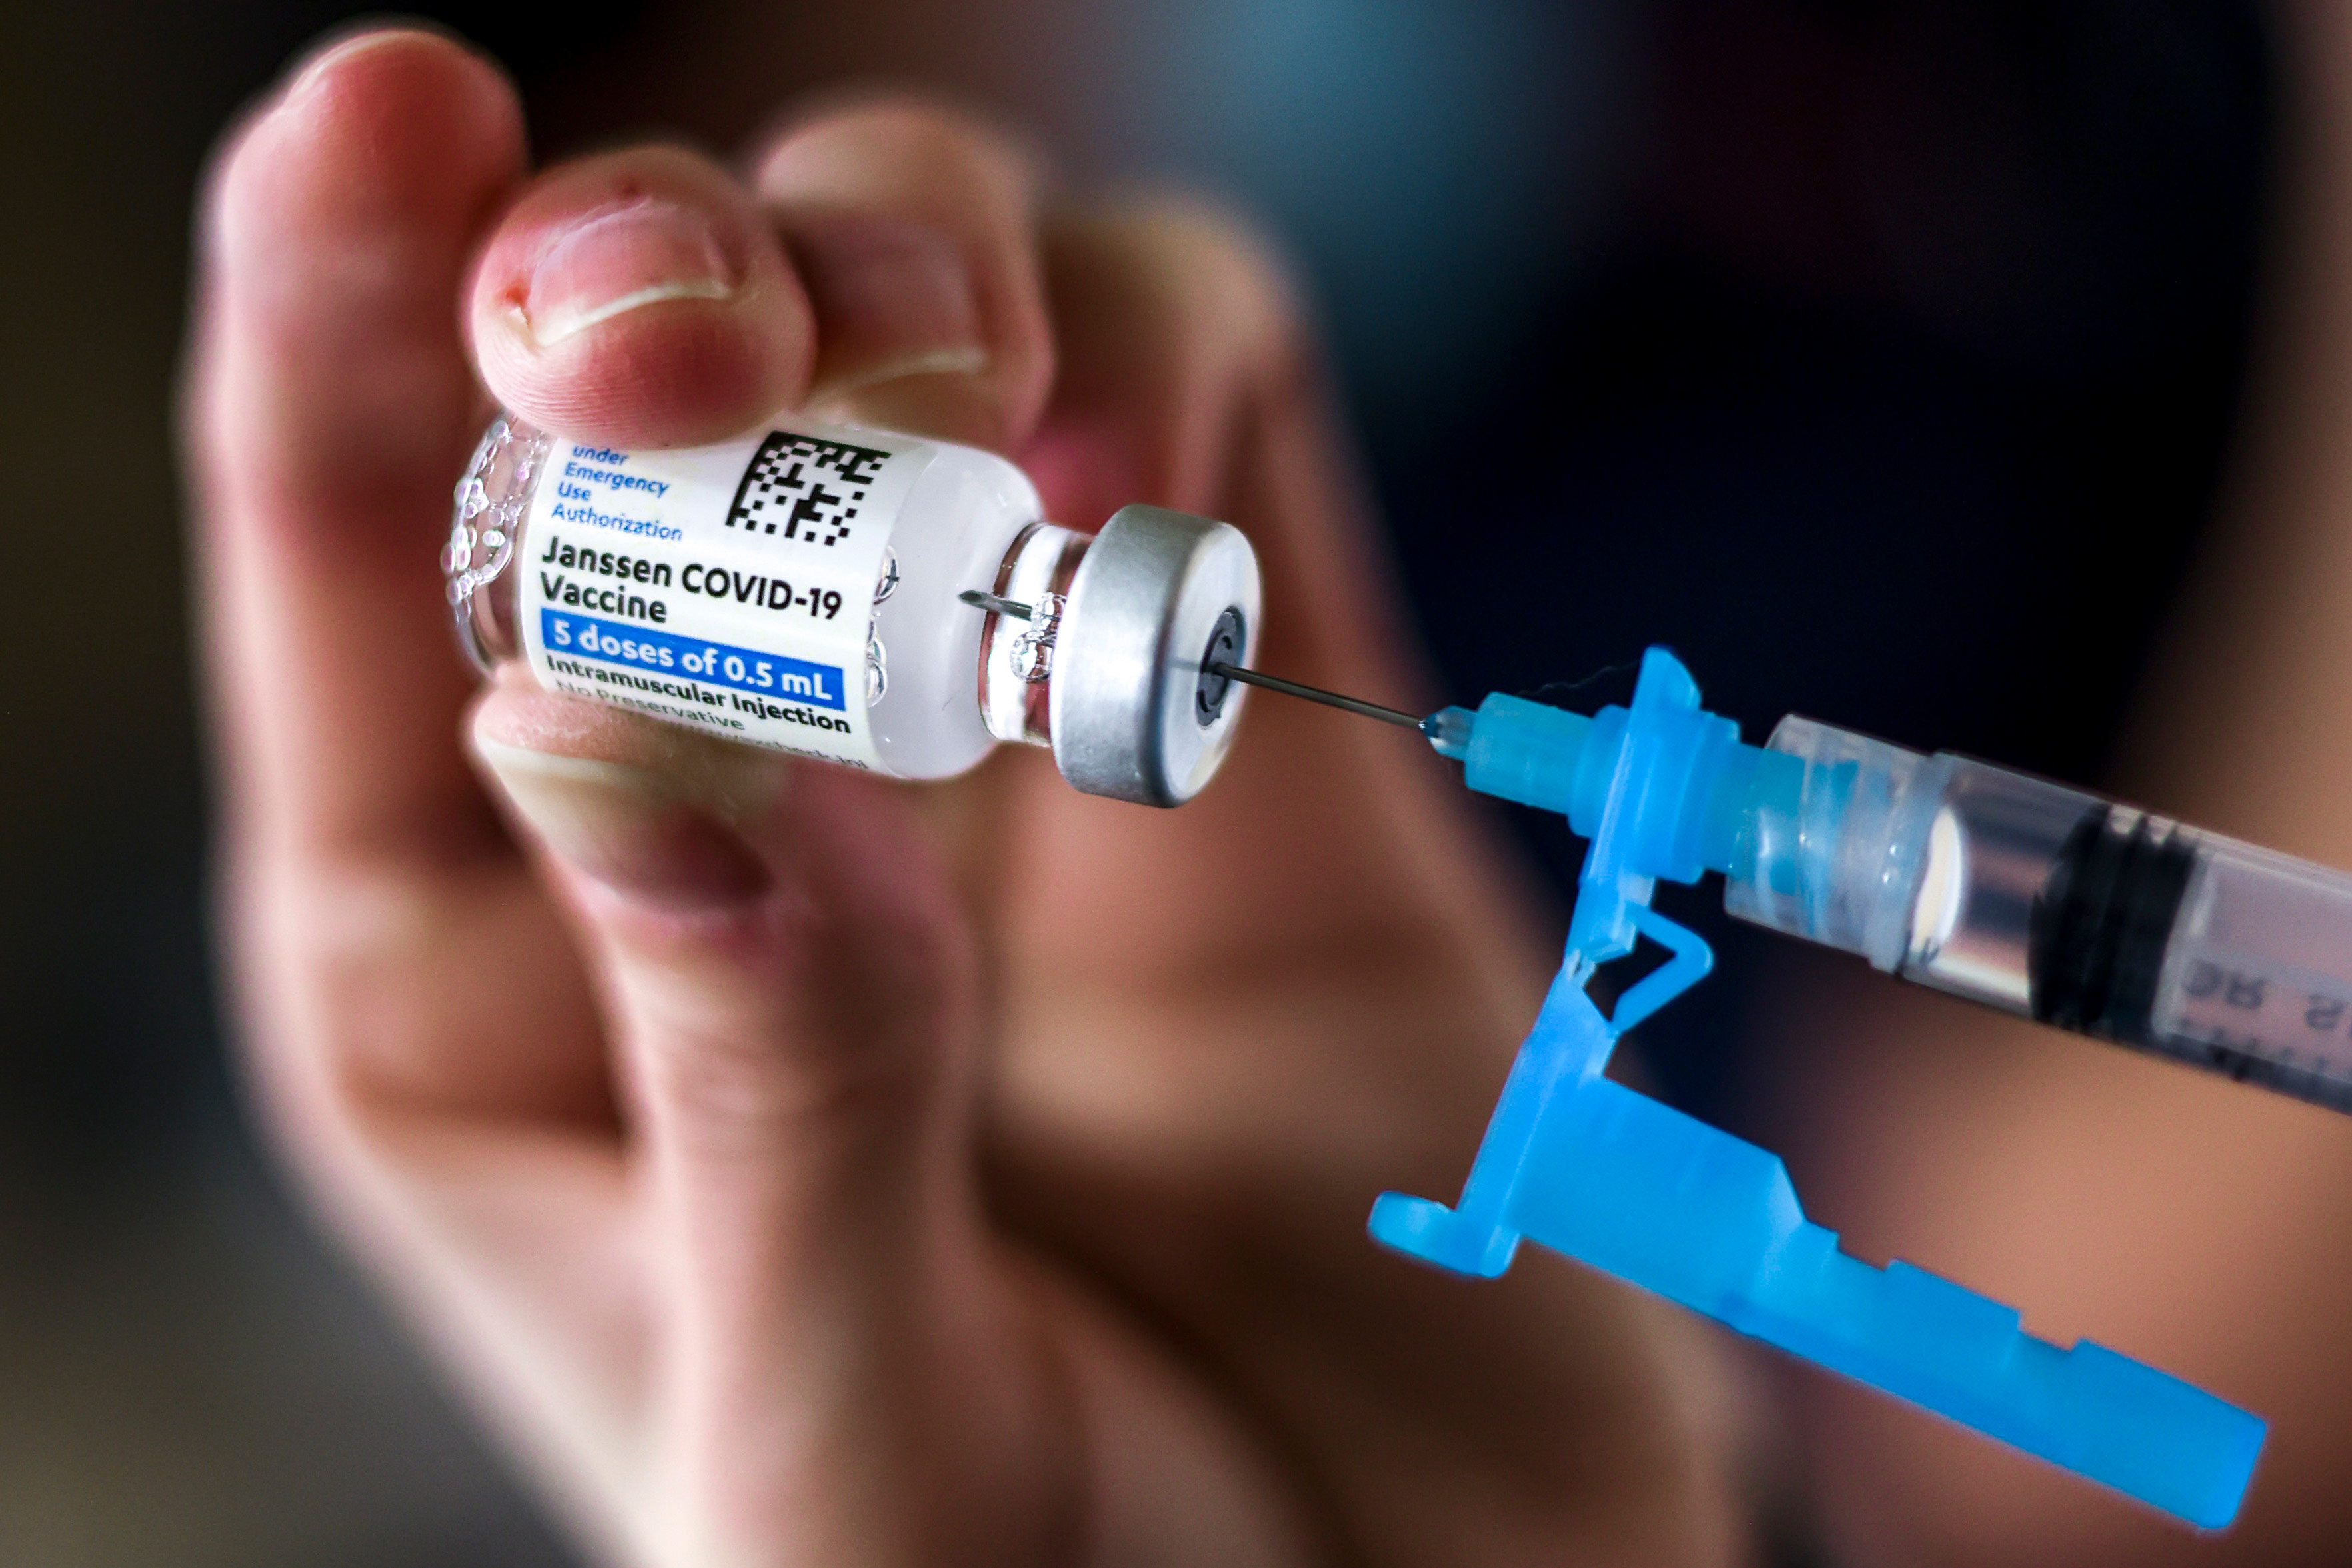 A dose is drawn from a vial of the Johnson & Johnson COVID-19 vaccine at an event put on by the Thornton Fire Department on March 6 in Thornton, Colorado. 